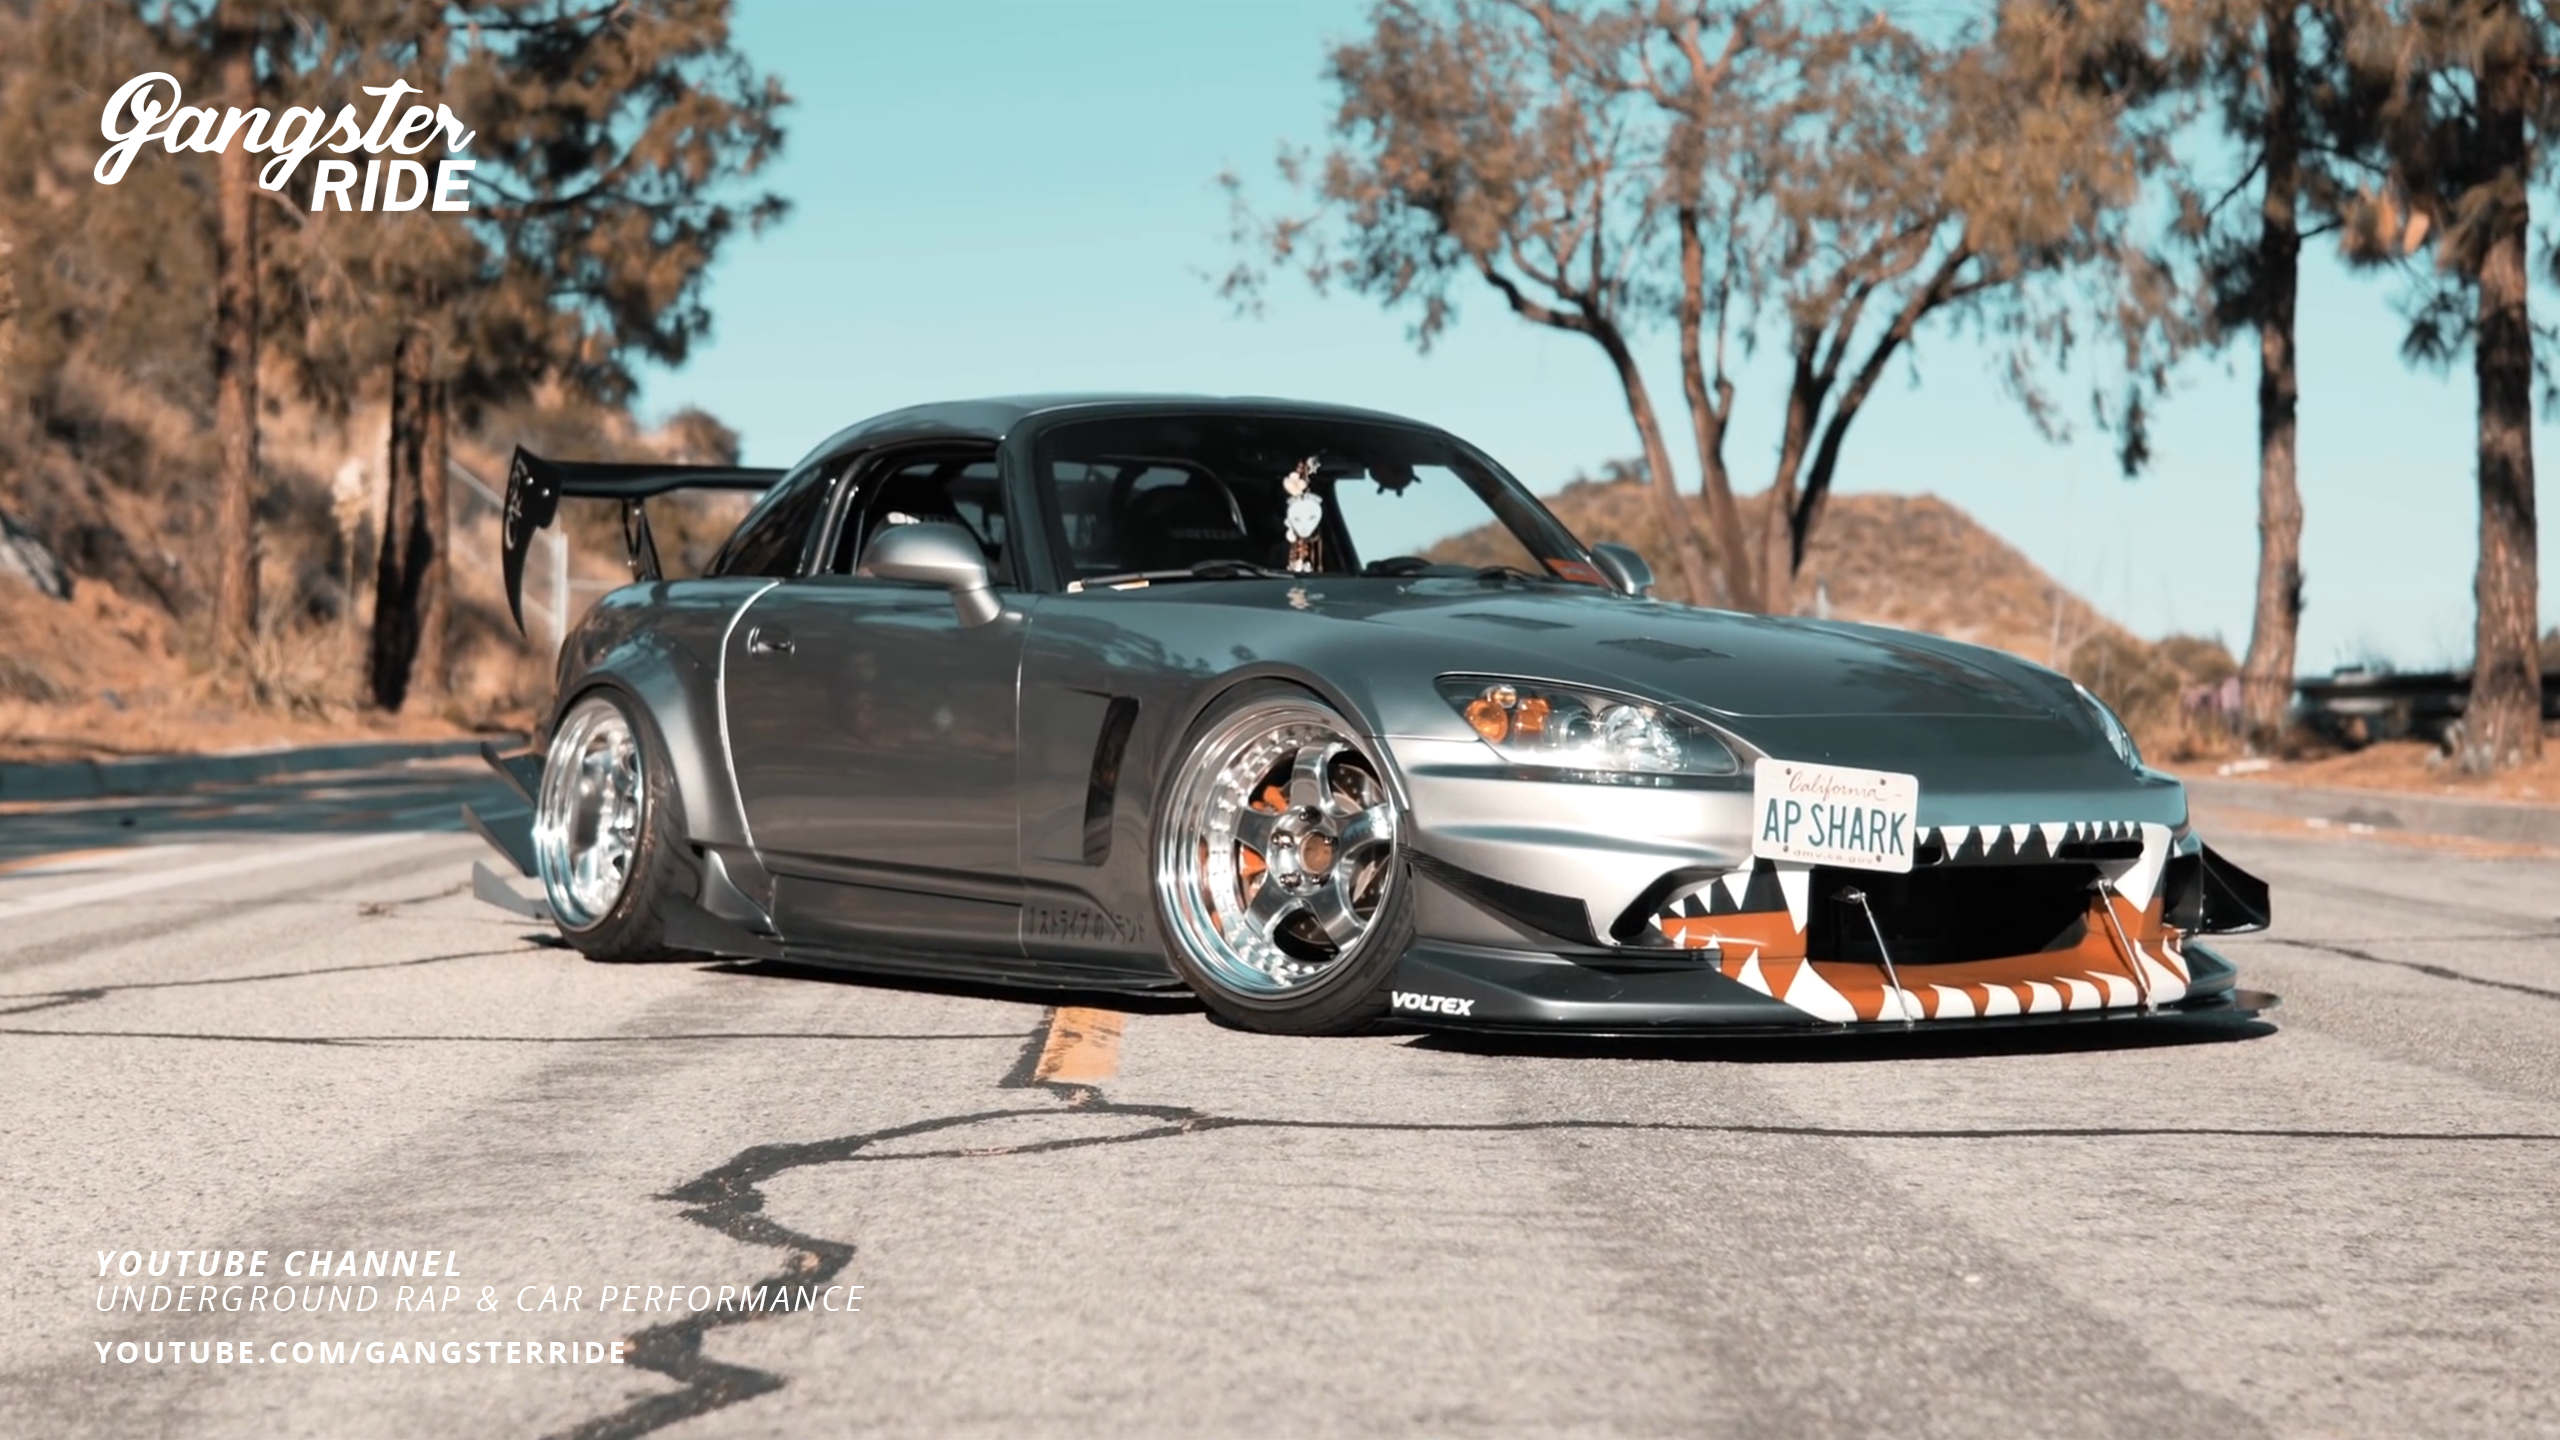 General 2560x1440 Honda S2000 The Shark S2000 YouTube tuning modified Stance Nation Honda car vehicle silver cars Japanese cars